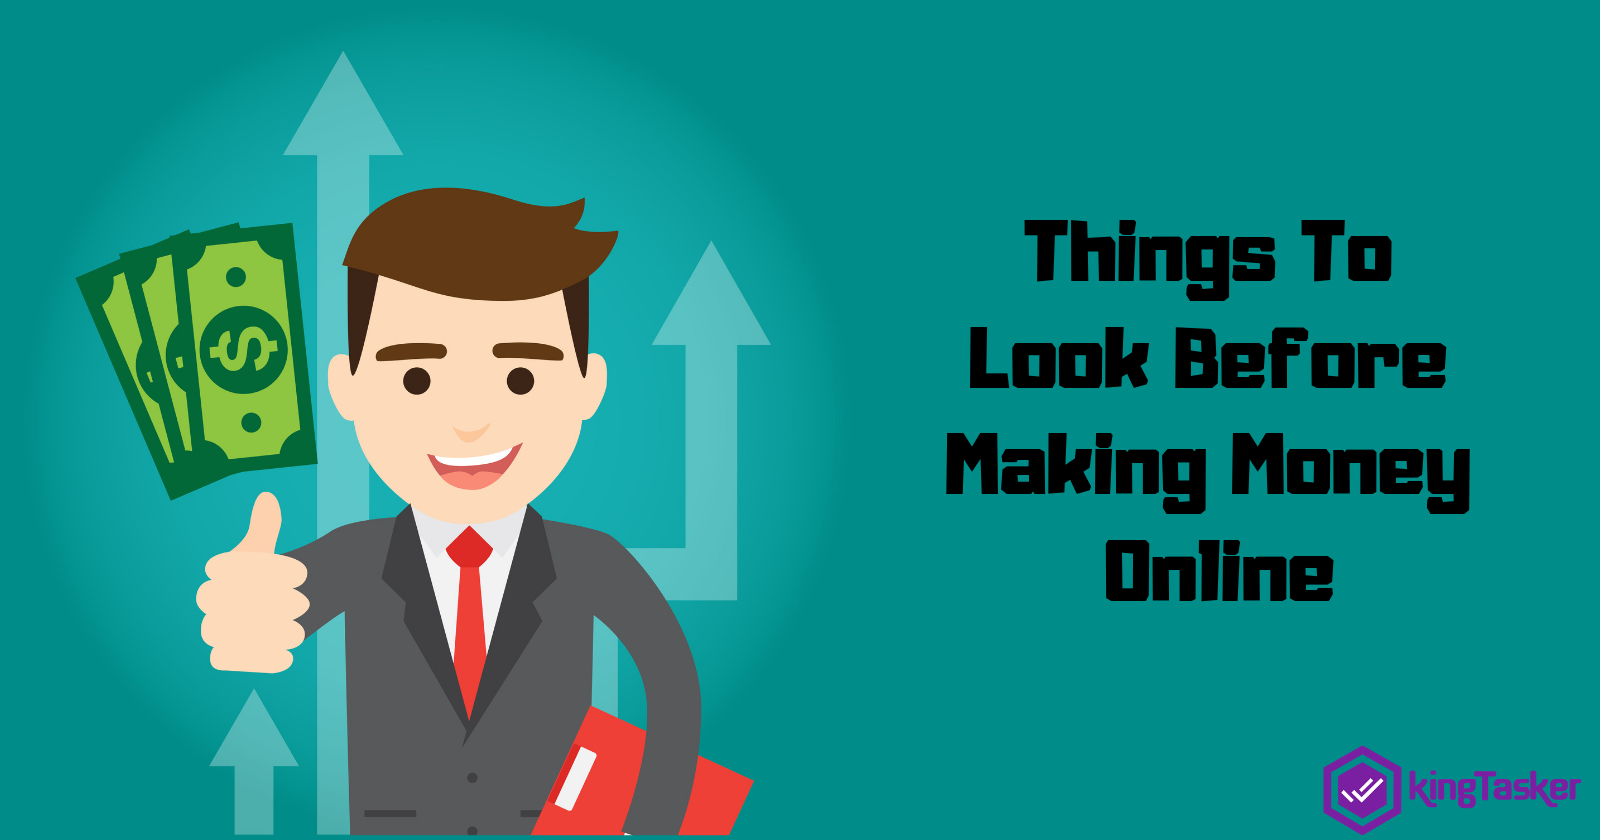 Things To Look Before Making Money Online